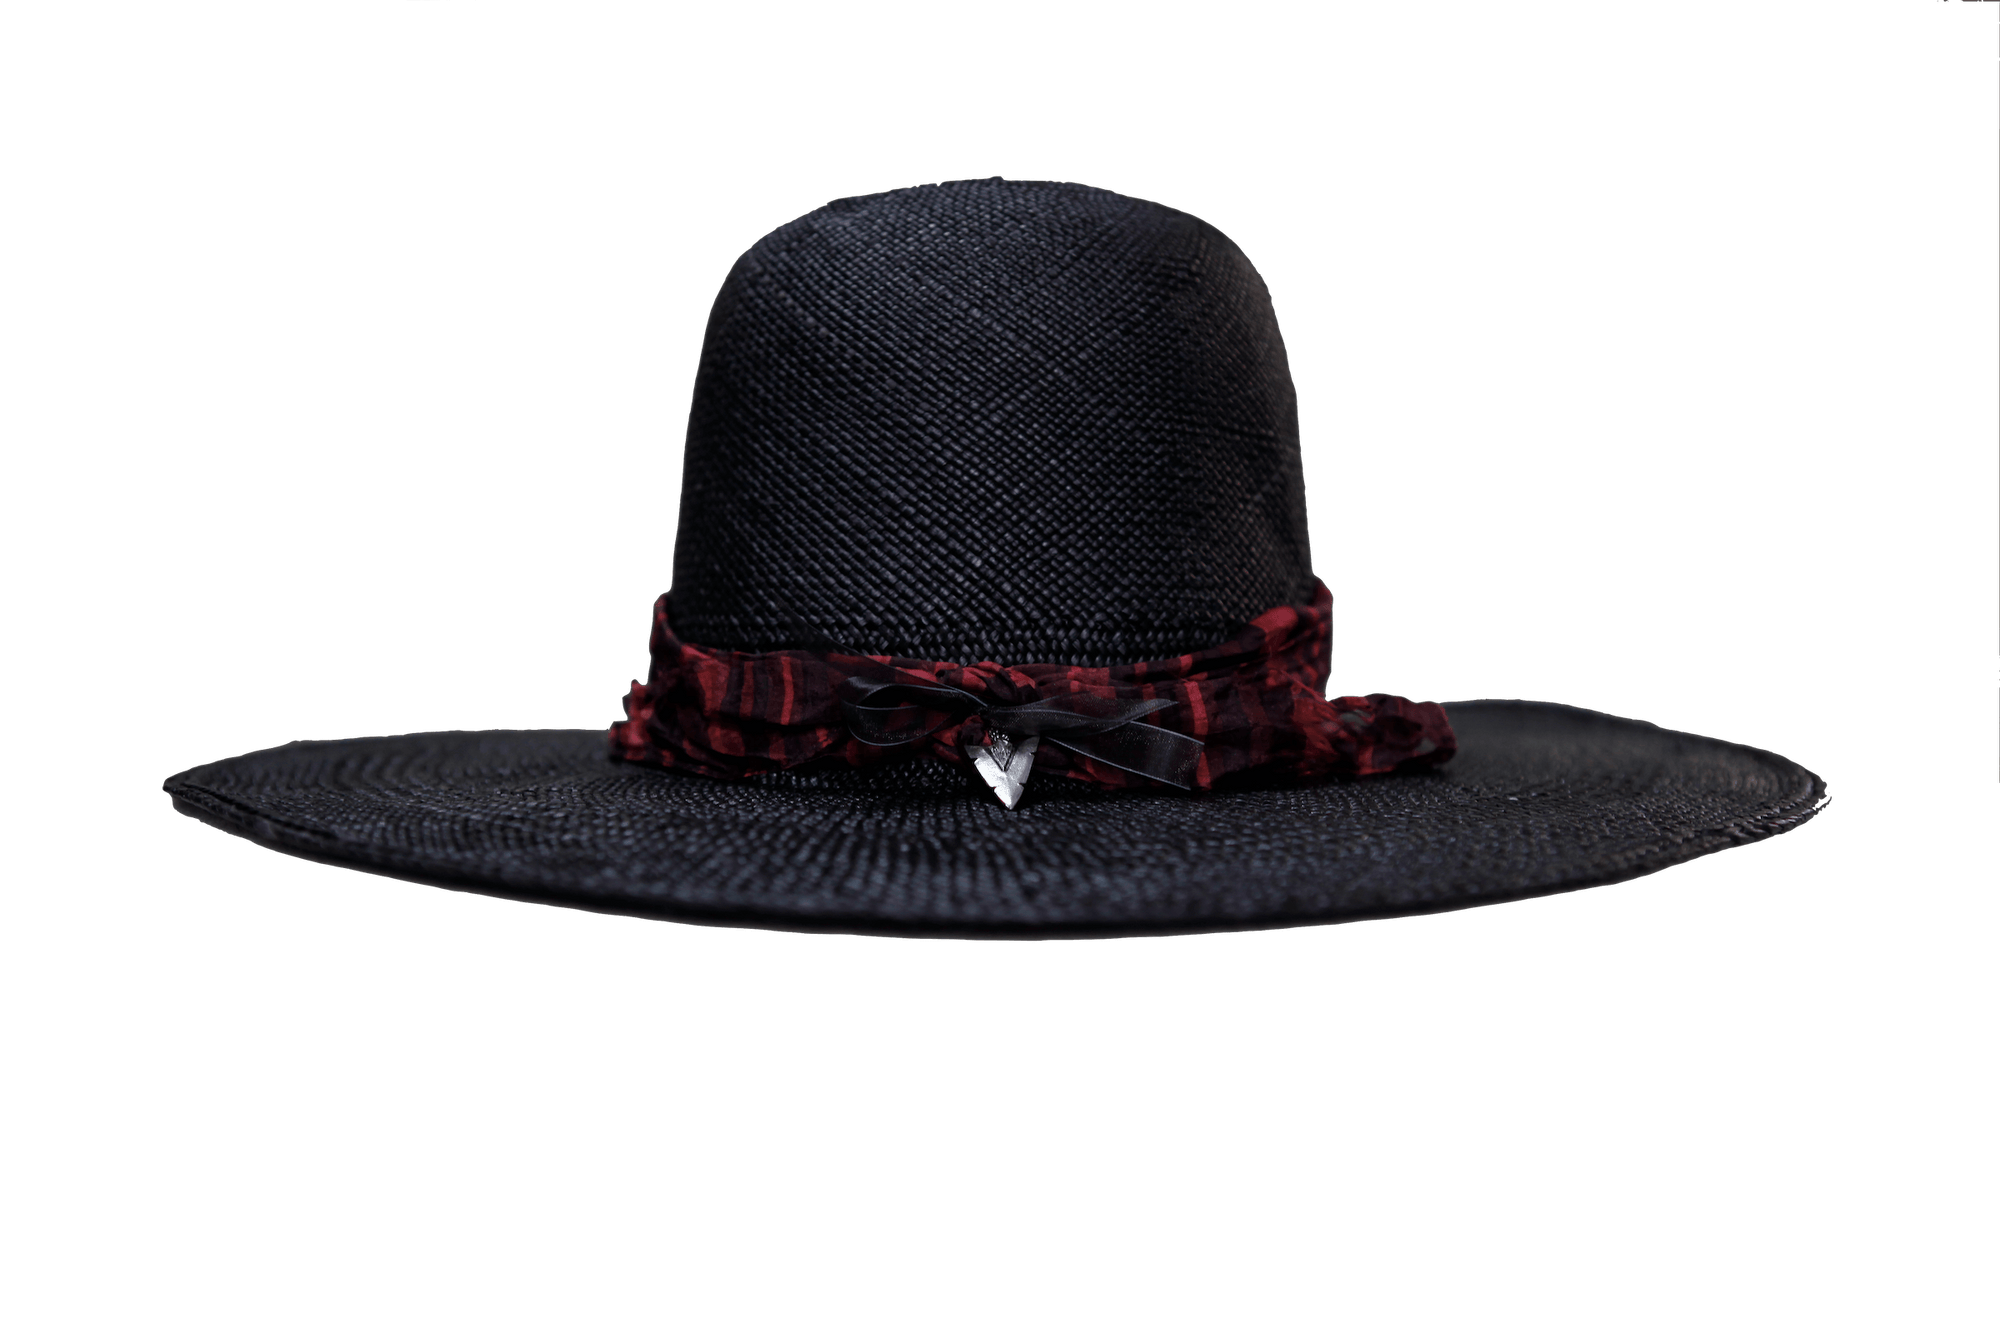 "High Noon" Hat - Black Straw with Red Silk Band & Silver Arrowhead Pendant